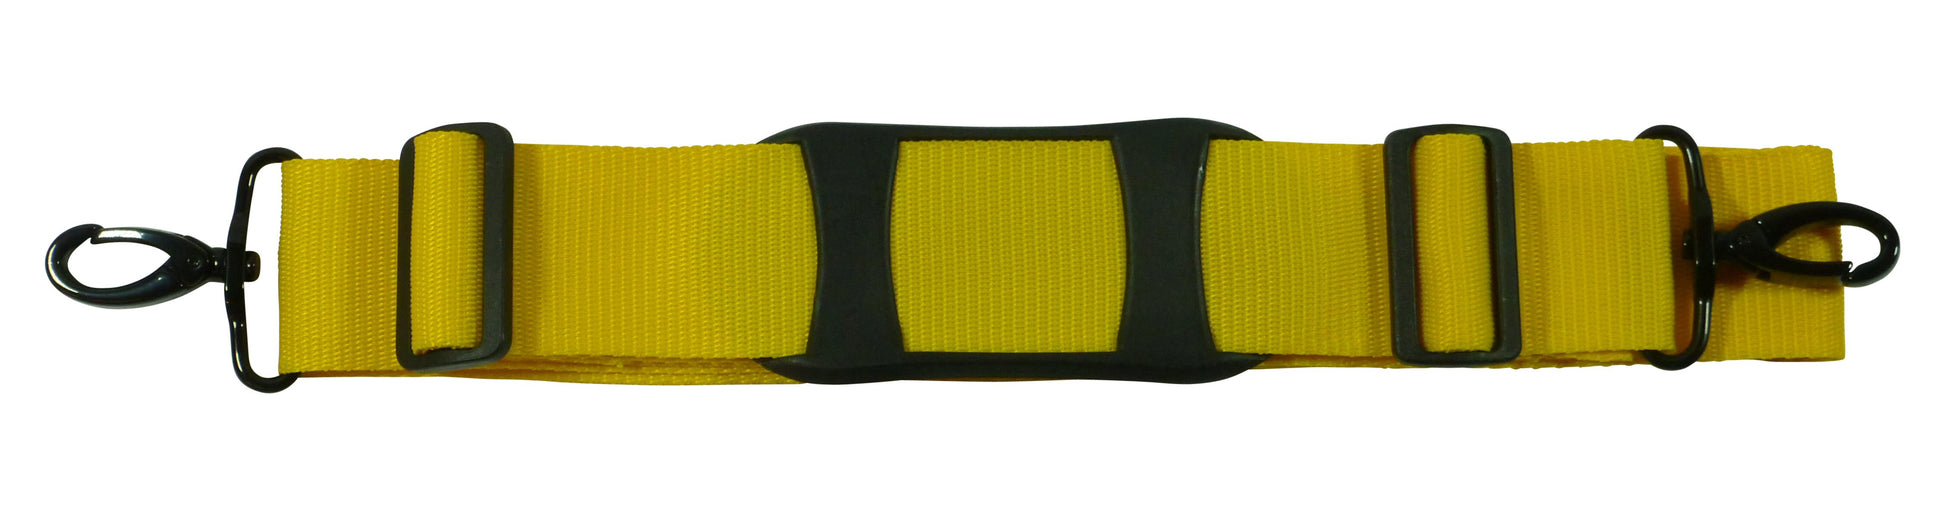 Benristraps 50mm Bag Strap with Metal Buckles and Shoulder Pad, 175cm in yellow